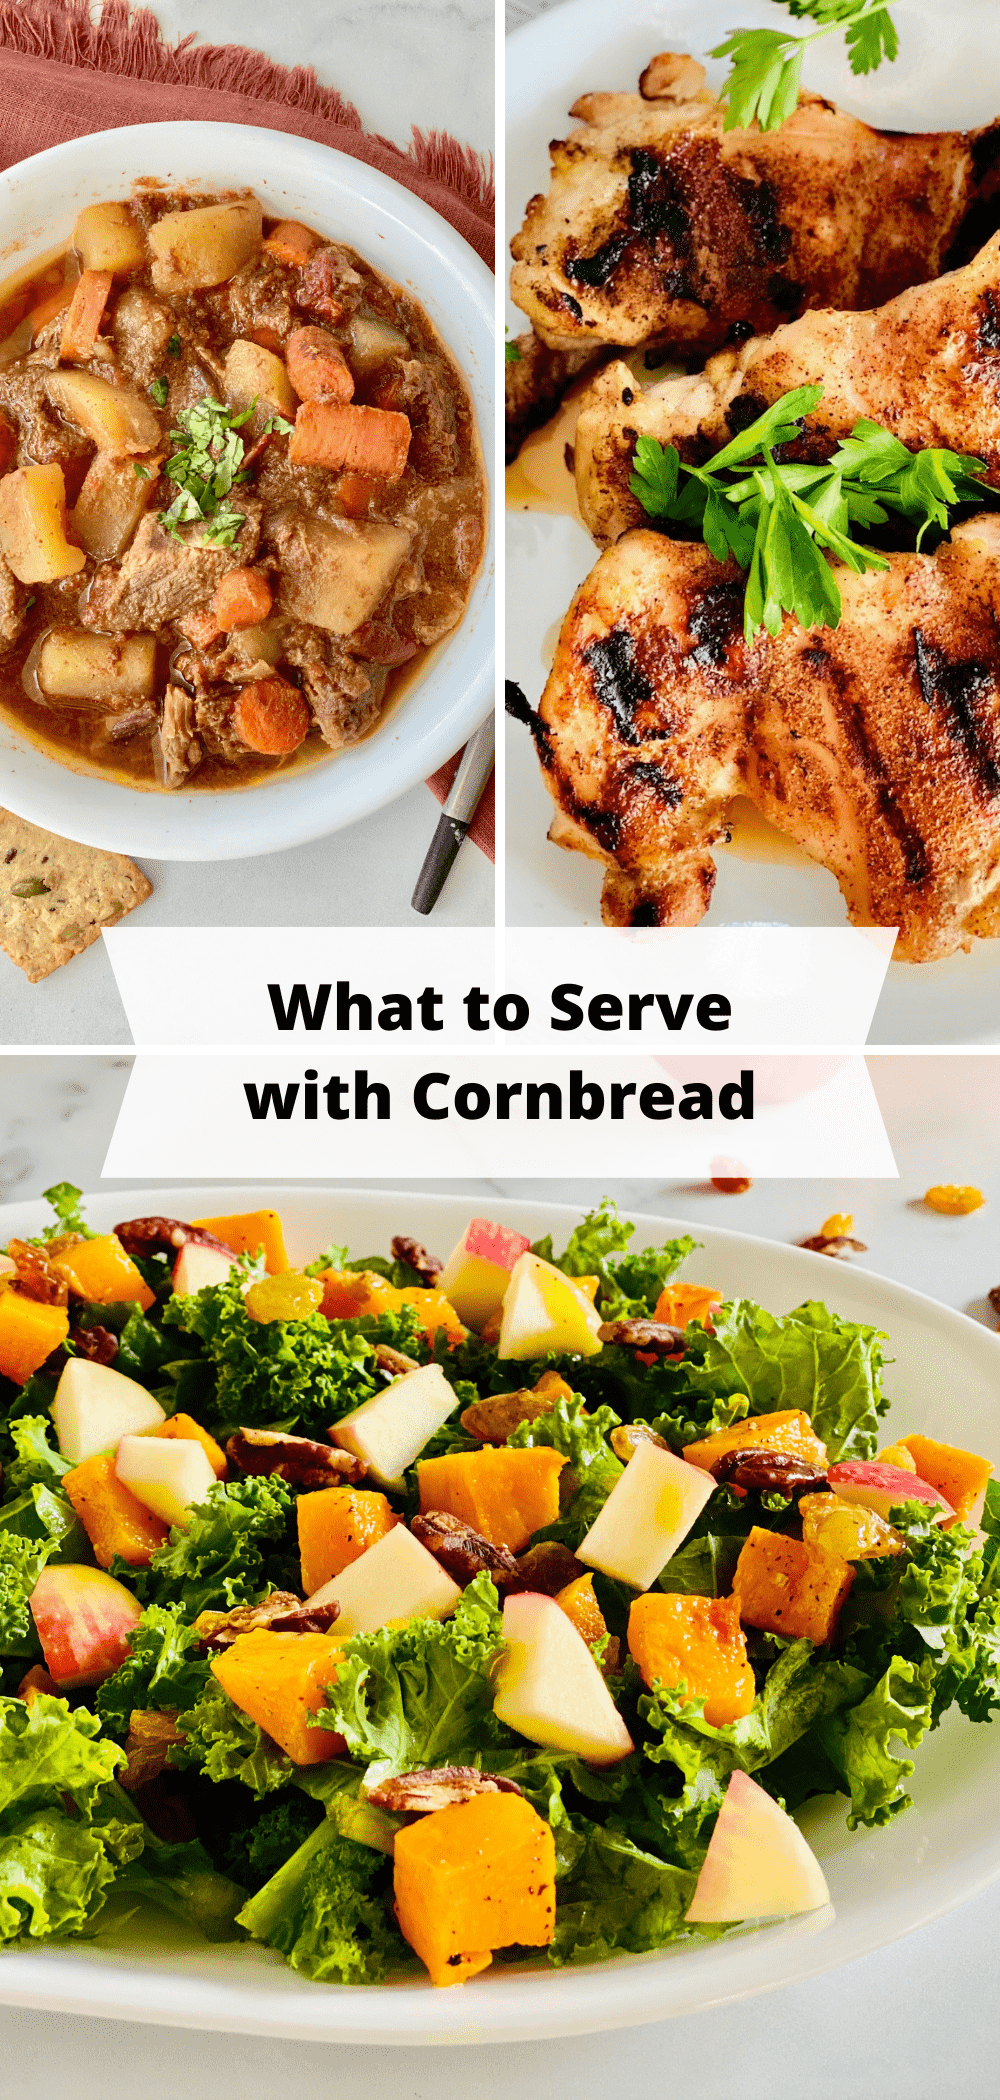 3 images of what to serve with cornbrread recipes for beef stew grilled chicken and kale salad